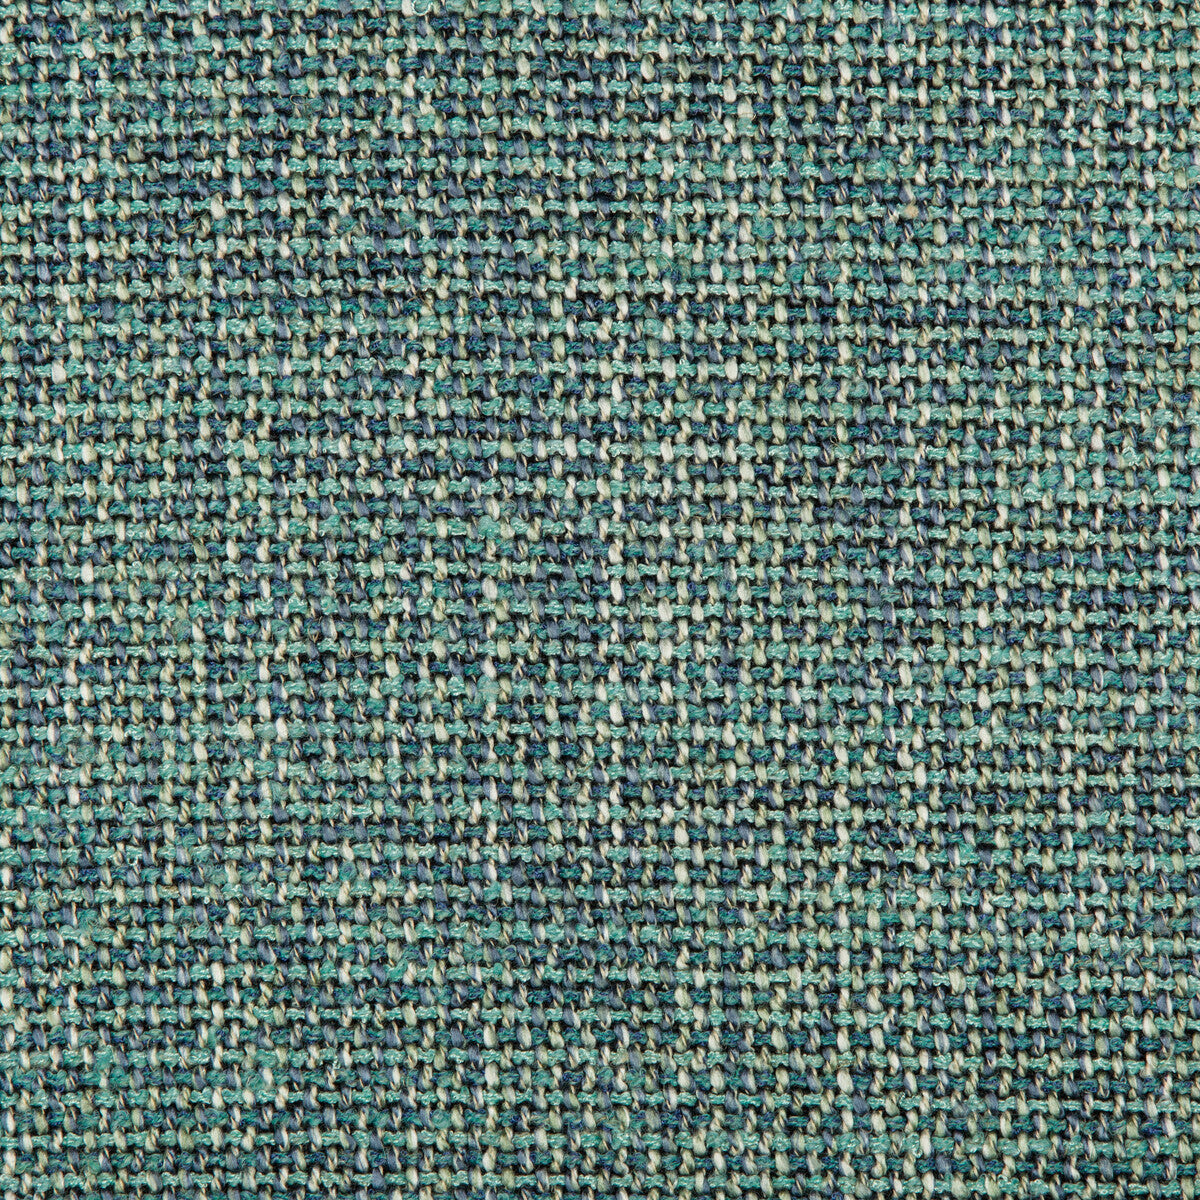 Cyncy fabric in atlantic color - pattern 35975.35.0 - by Kravet Design in the Barry Lantz Canvas To Cloth collection